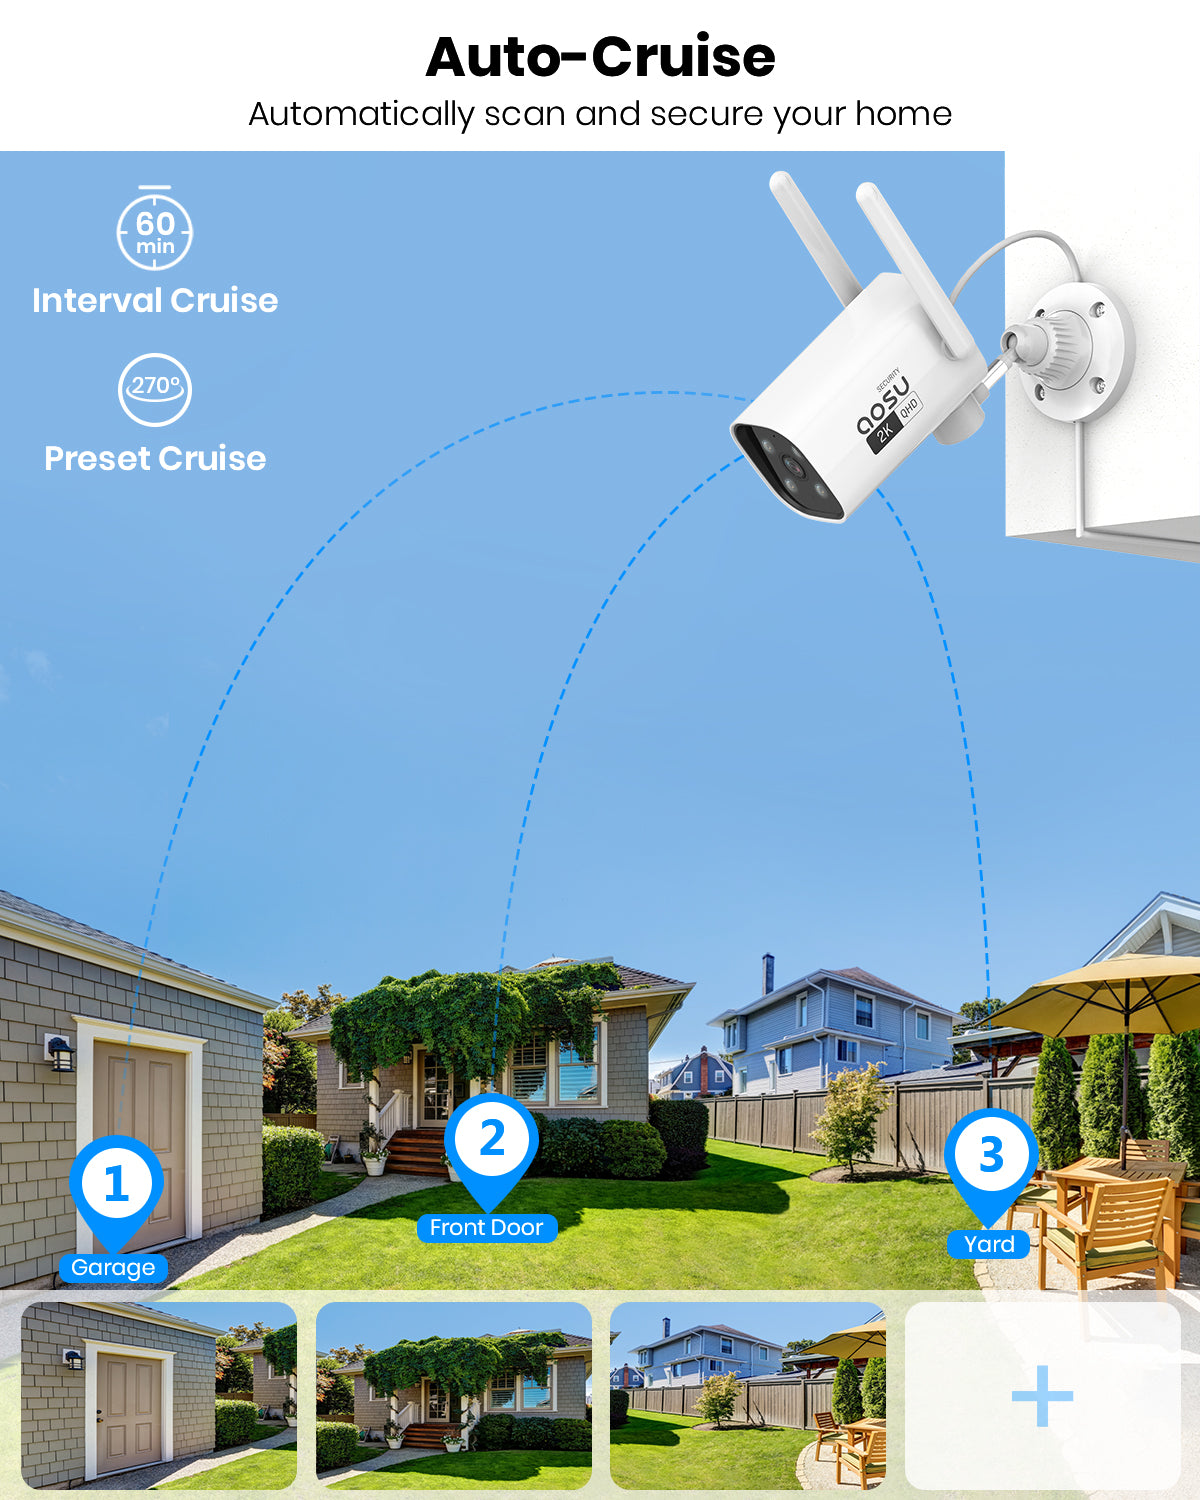 Auto-Cruise - Automatically scan and secure your home